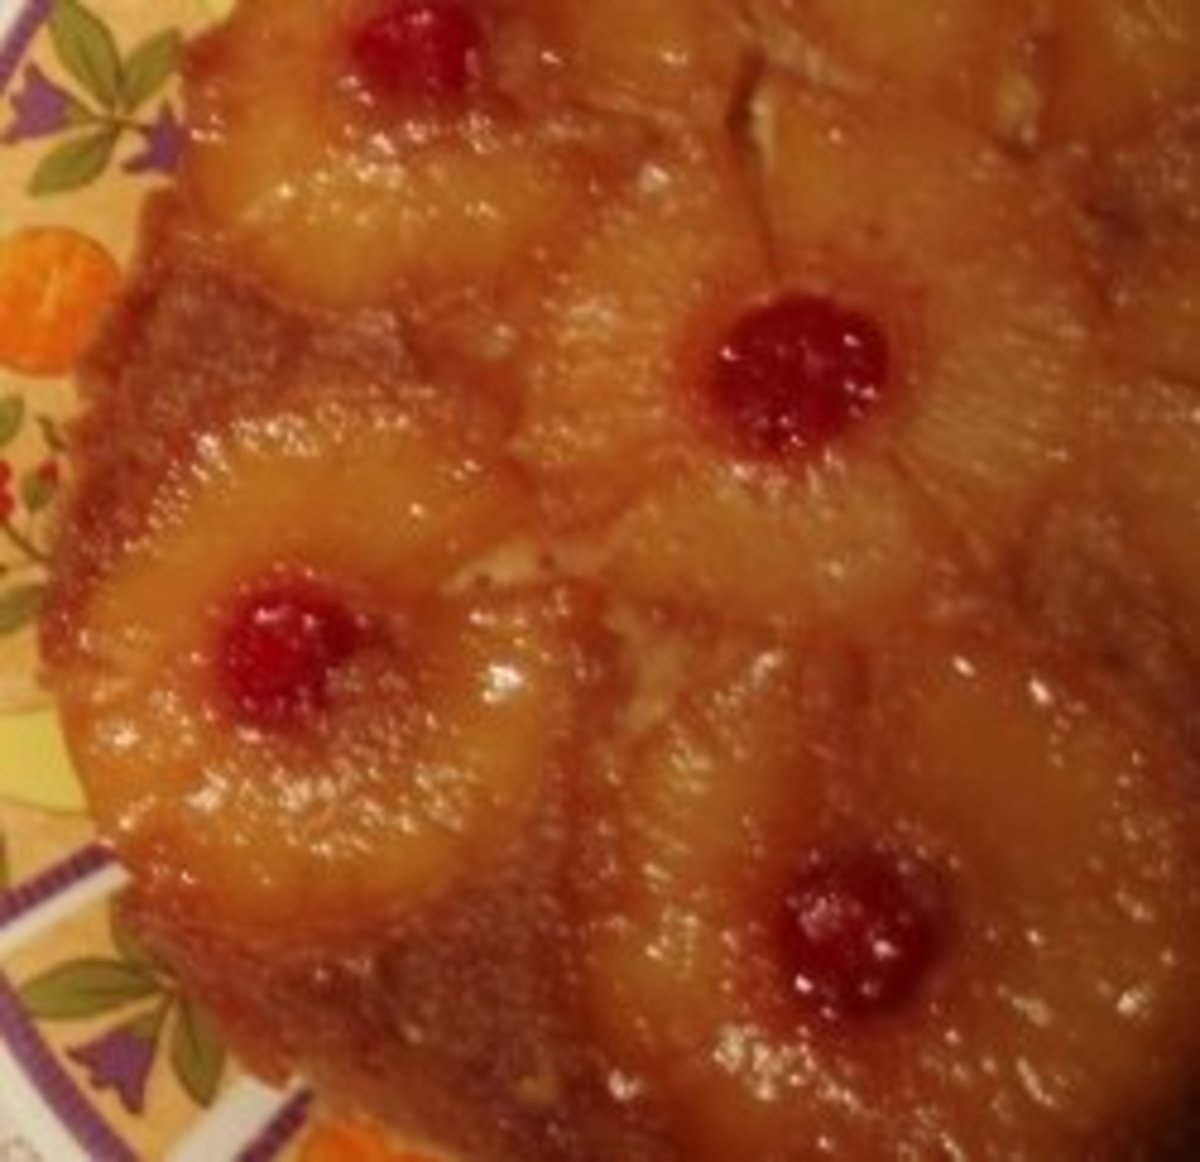 How to make pineapple upside down cake from scratch